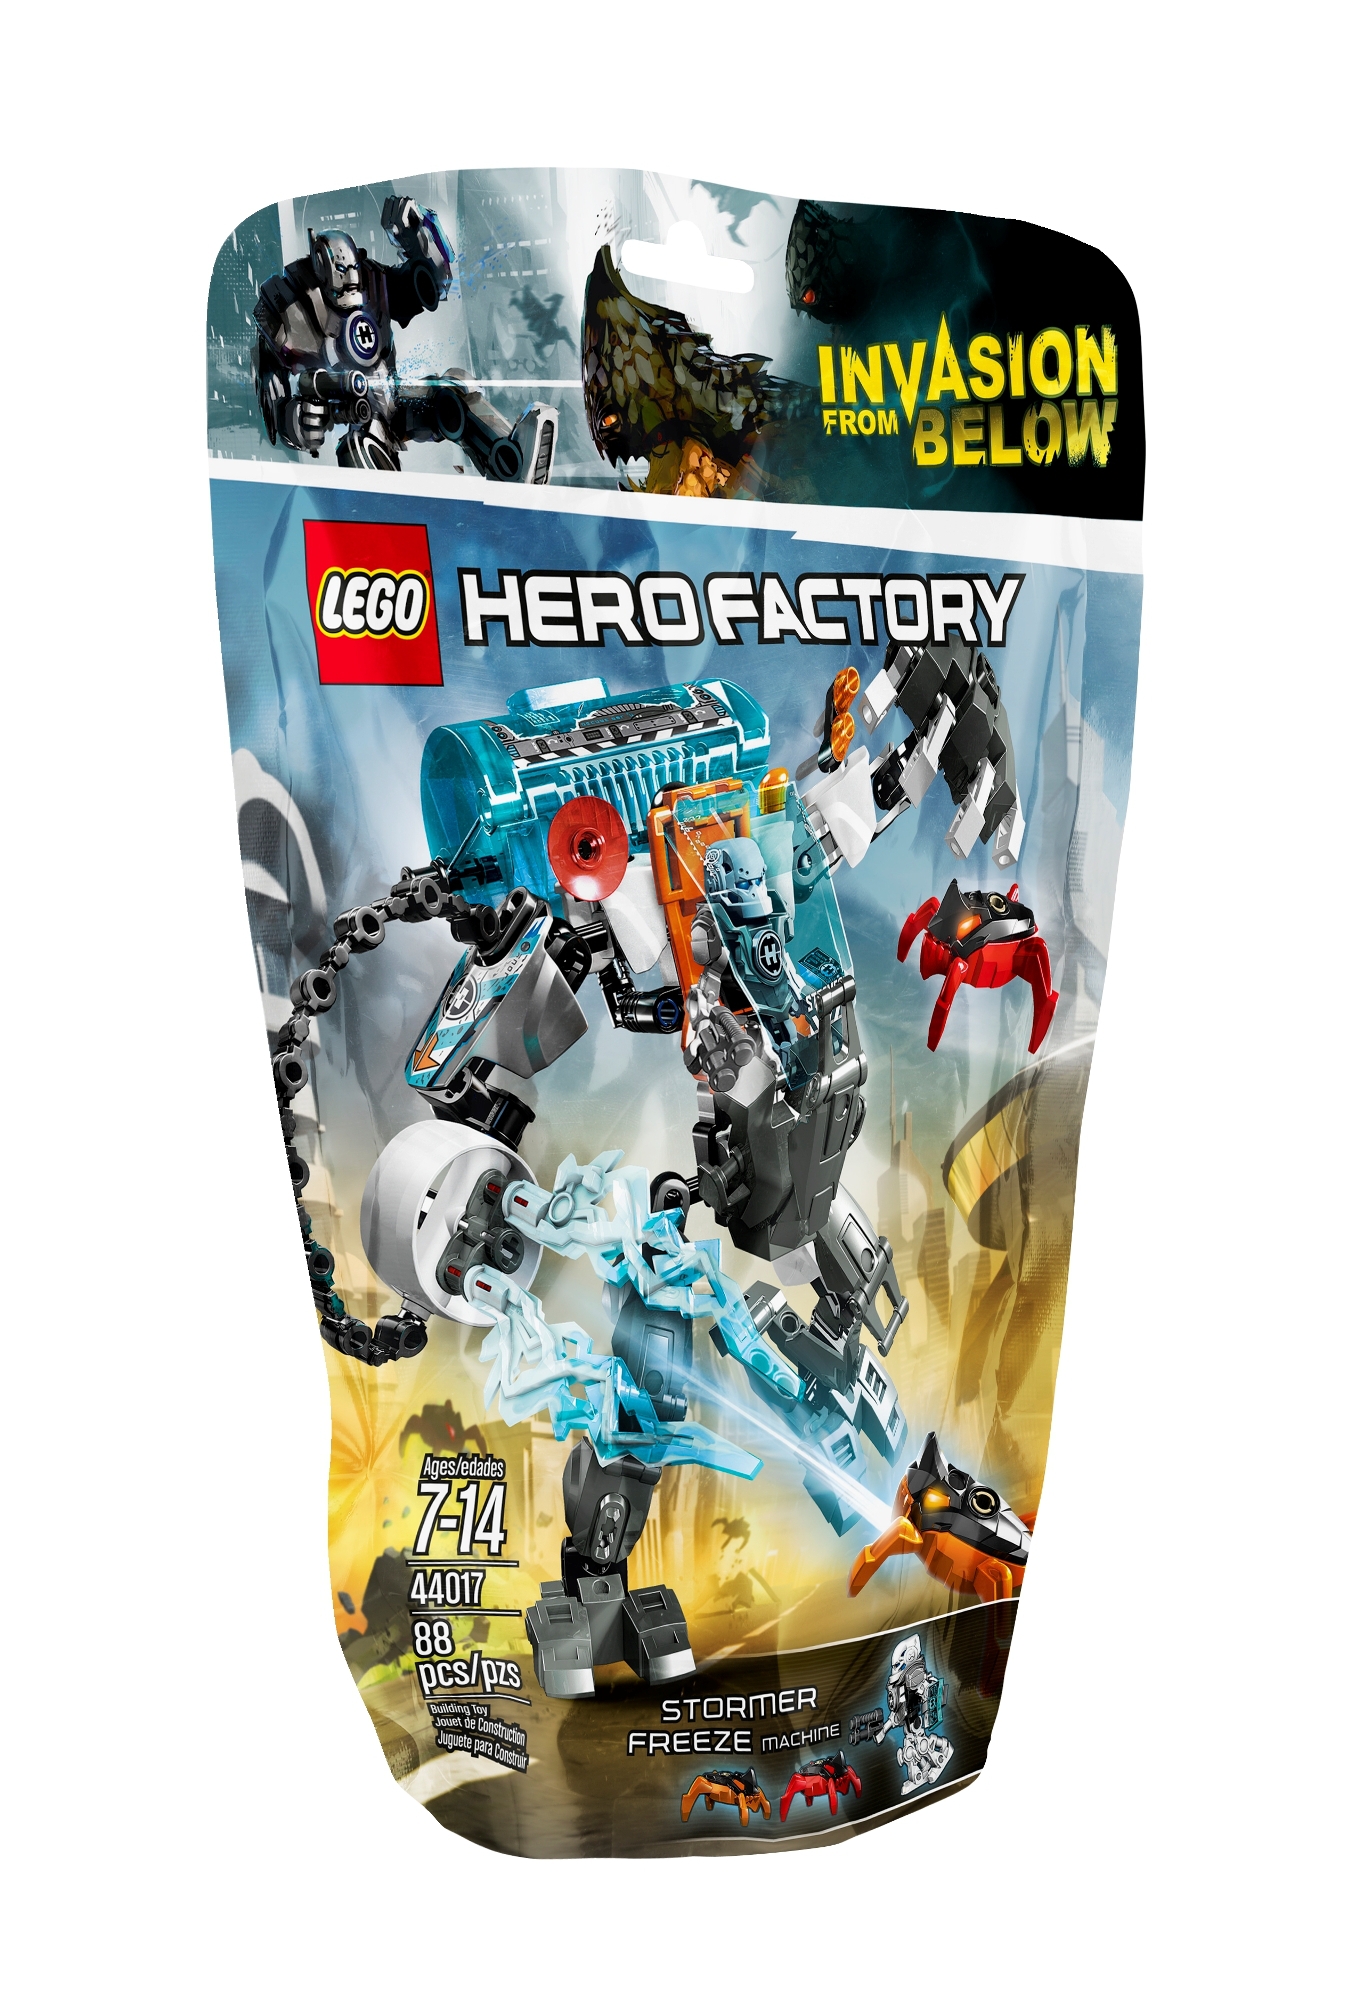 http://images2.wikia.nocookie.net/__cb20131112155707/lego/images/8/8a/Stormer_Freeze_Machine1.jpeg